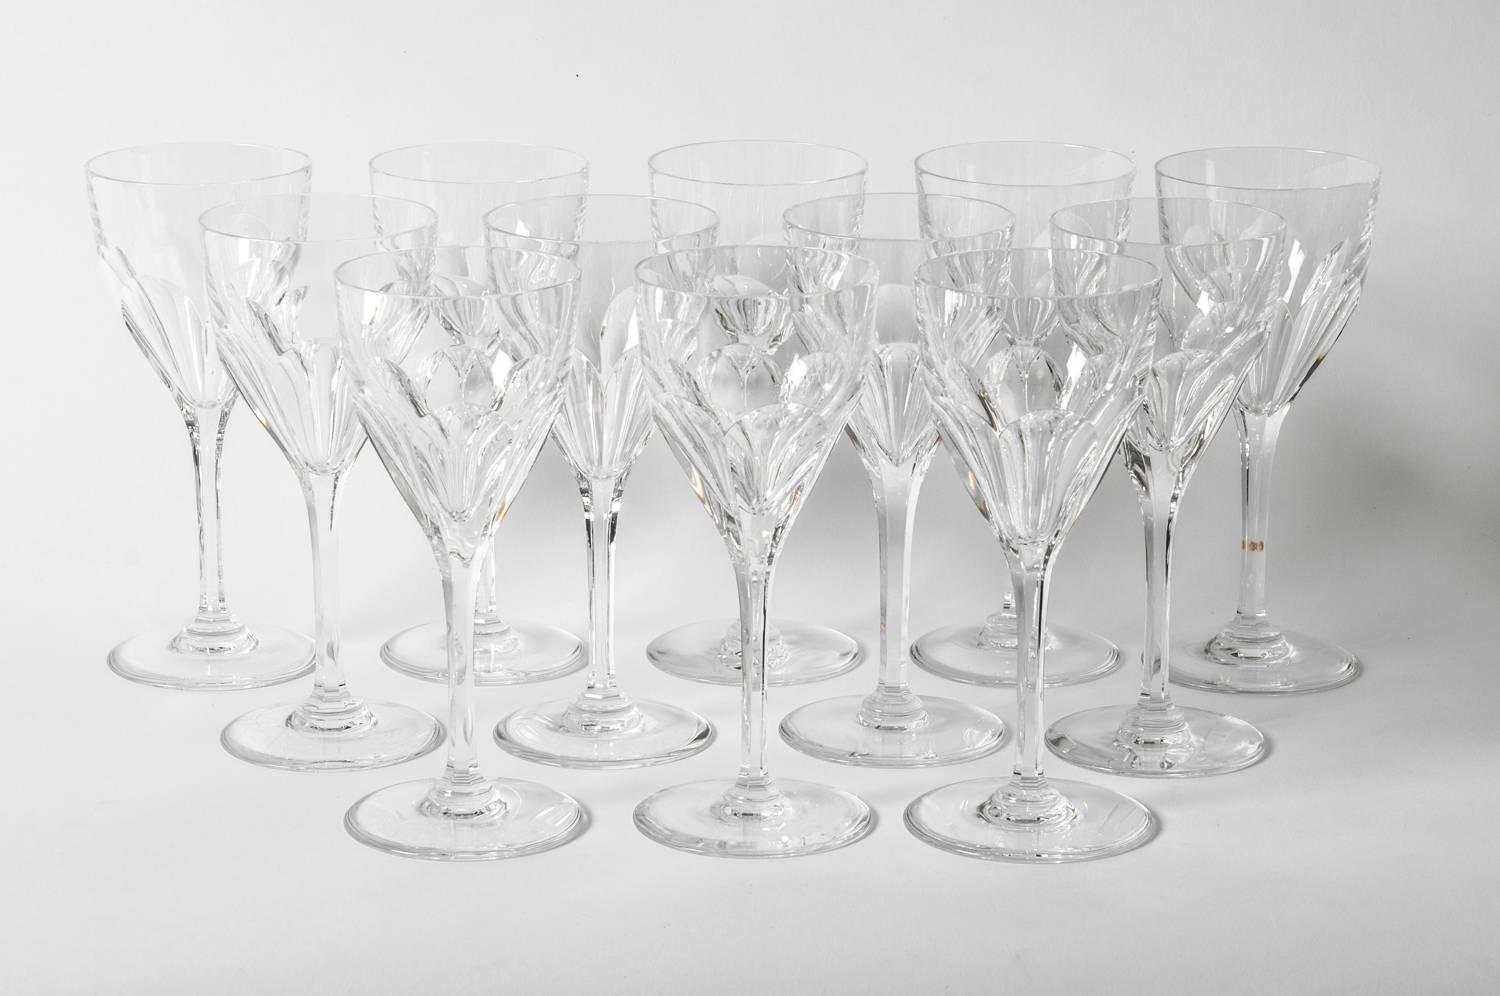 Vintage set of 12 Saint Louis crystal wine water glassware. Excellent condition. Each glass measures 7.5 inches high x 3.2 inches diameter.